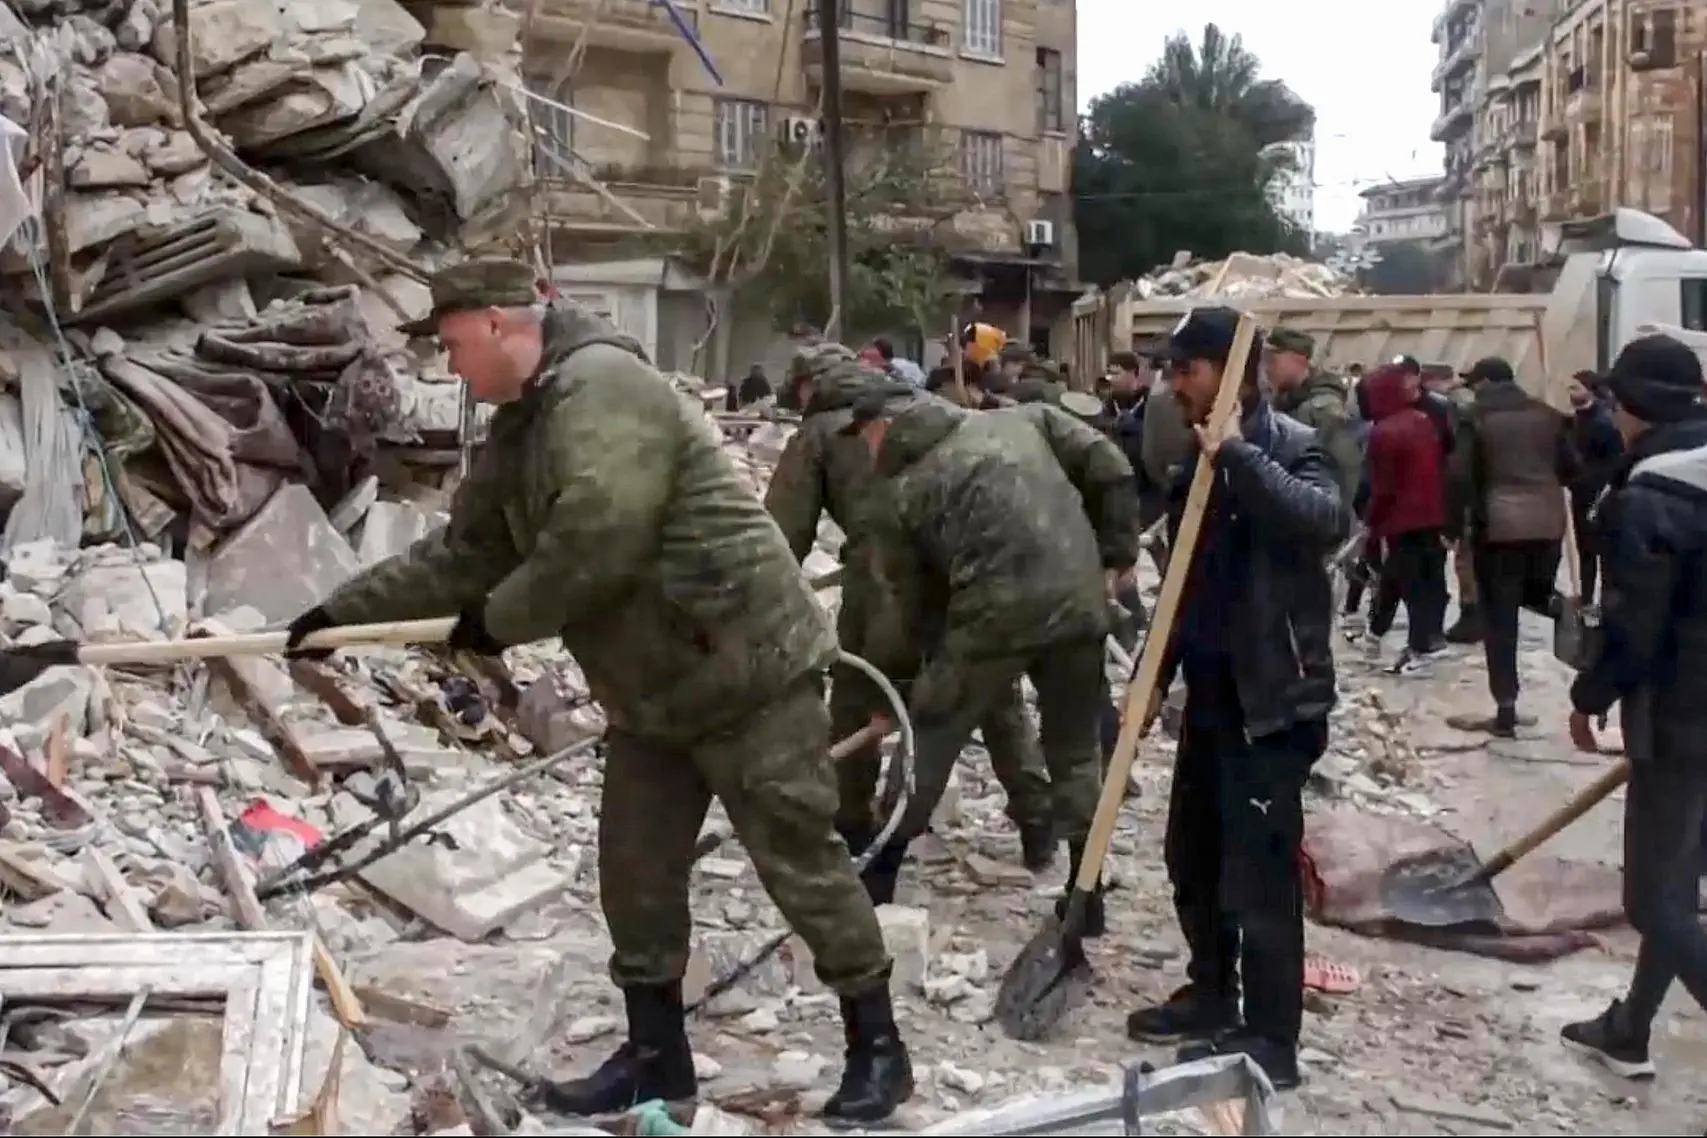 epa10452110 A still image taken from a handout video provided by the Russian Defence Ministry Press-Service on 07 February 2023 shows Russian servicemen helping locals search for victims at the site of a collapsed building after a major earthquake in Latakia, Syria. More than 4,000 people were killed and thousands more injured after a major 7.8 magnitude earthquake struck southern Turkey and northern Syria on 06 February. Authorities fear the death toll will keep climbing as rescuers look for survivors across the region. EPA/RUSSIAN DEFENCE MINISTRY PRESS SERVICE HANDOUT -- BEST QUALITY AVAILABLE -- MANDATORY CREDIT -- HANDOUT EDITORIAL USE ONLY/NO SALES